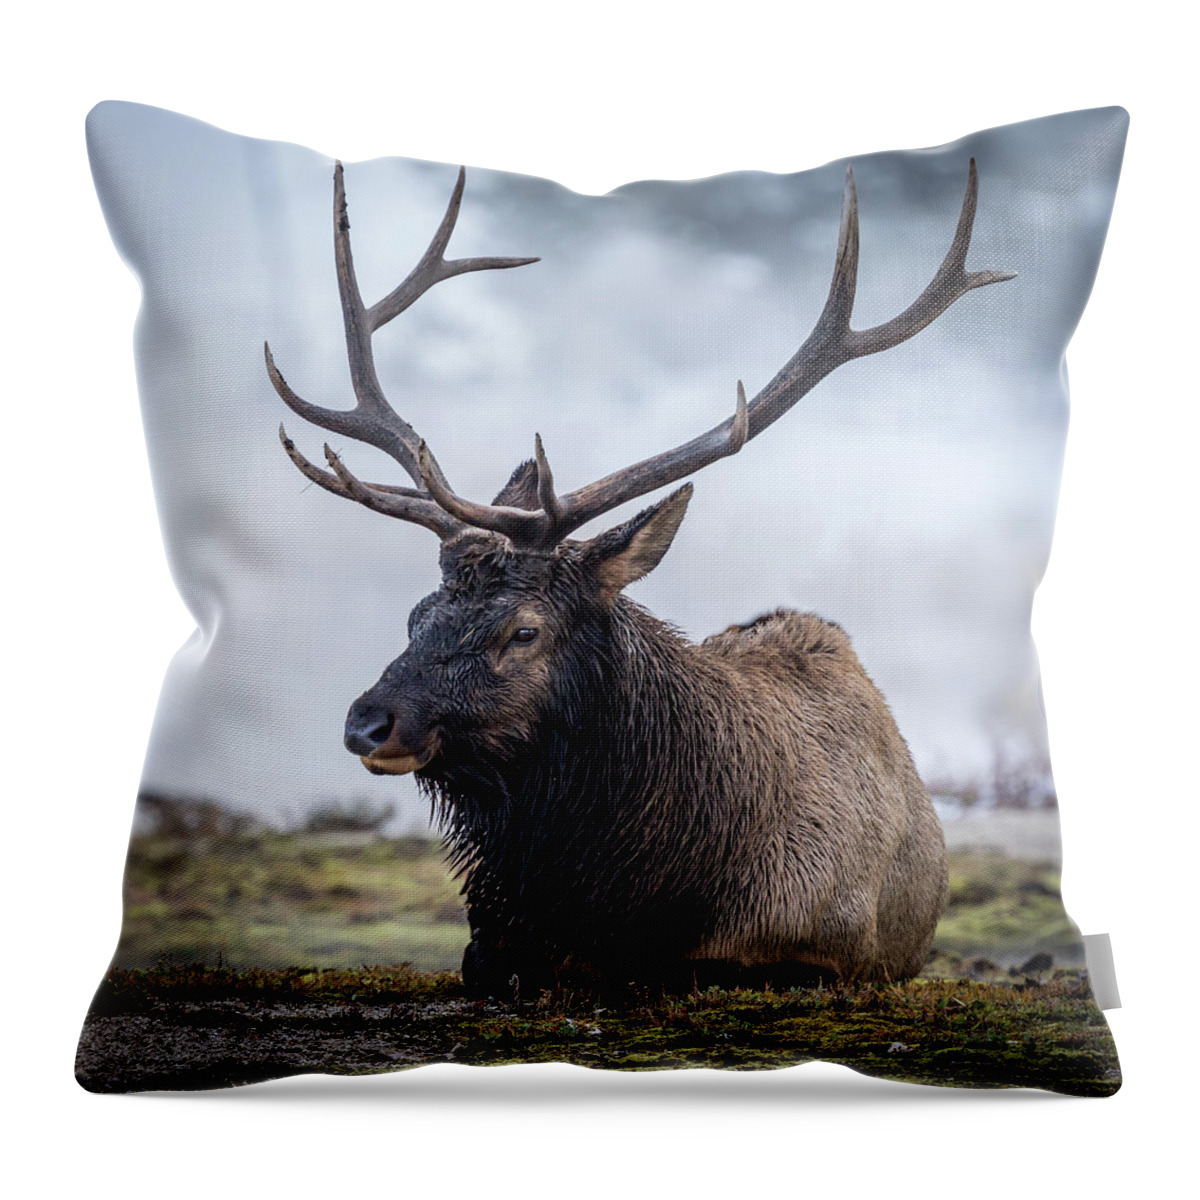 Landscape Throw Pillow featuring the photograph Big Boy by Gary Migues